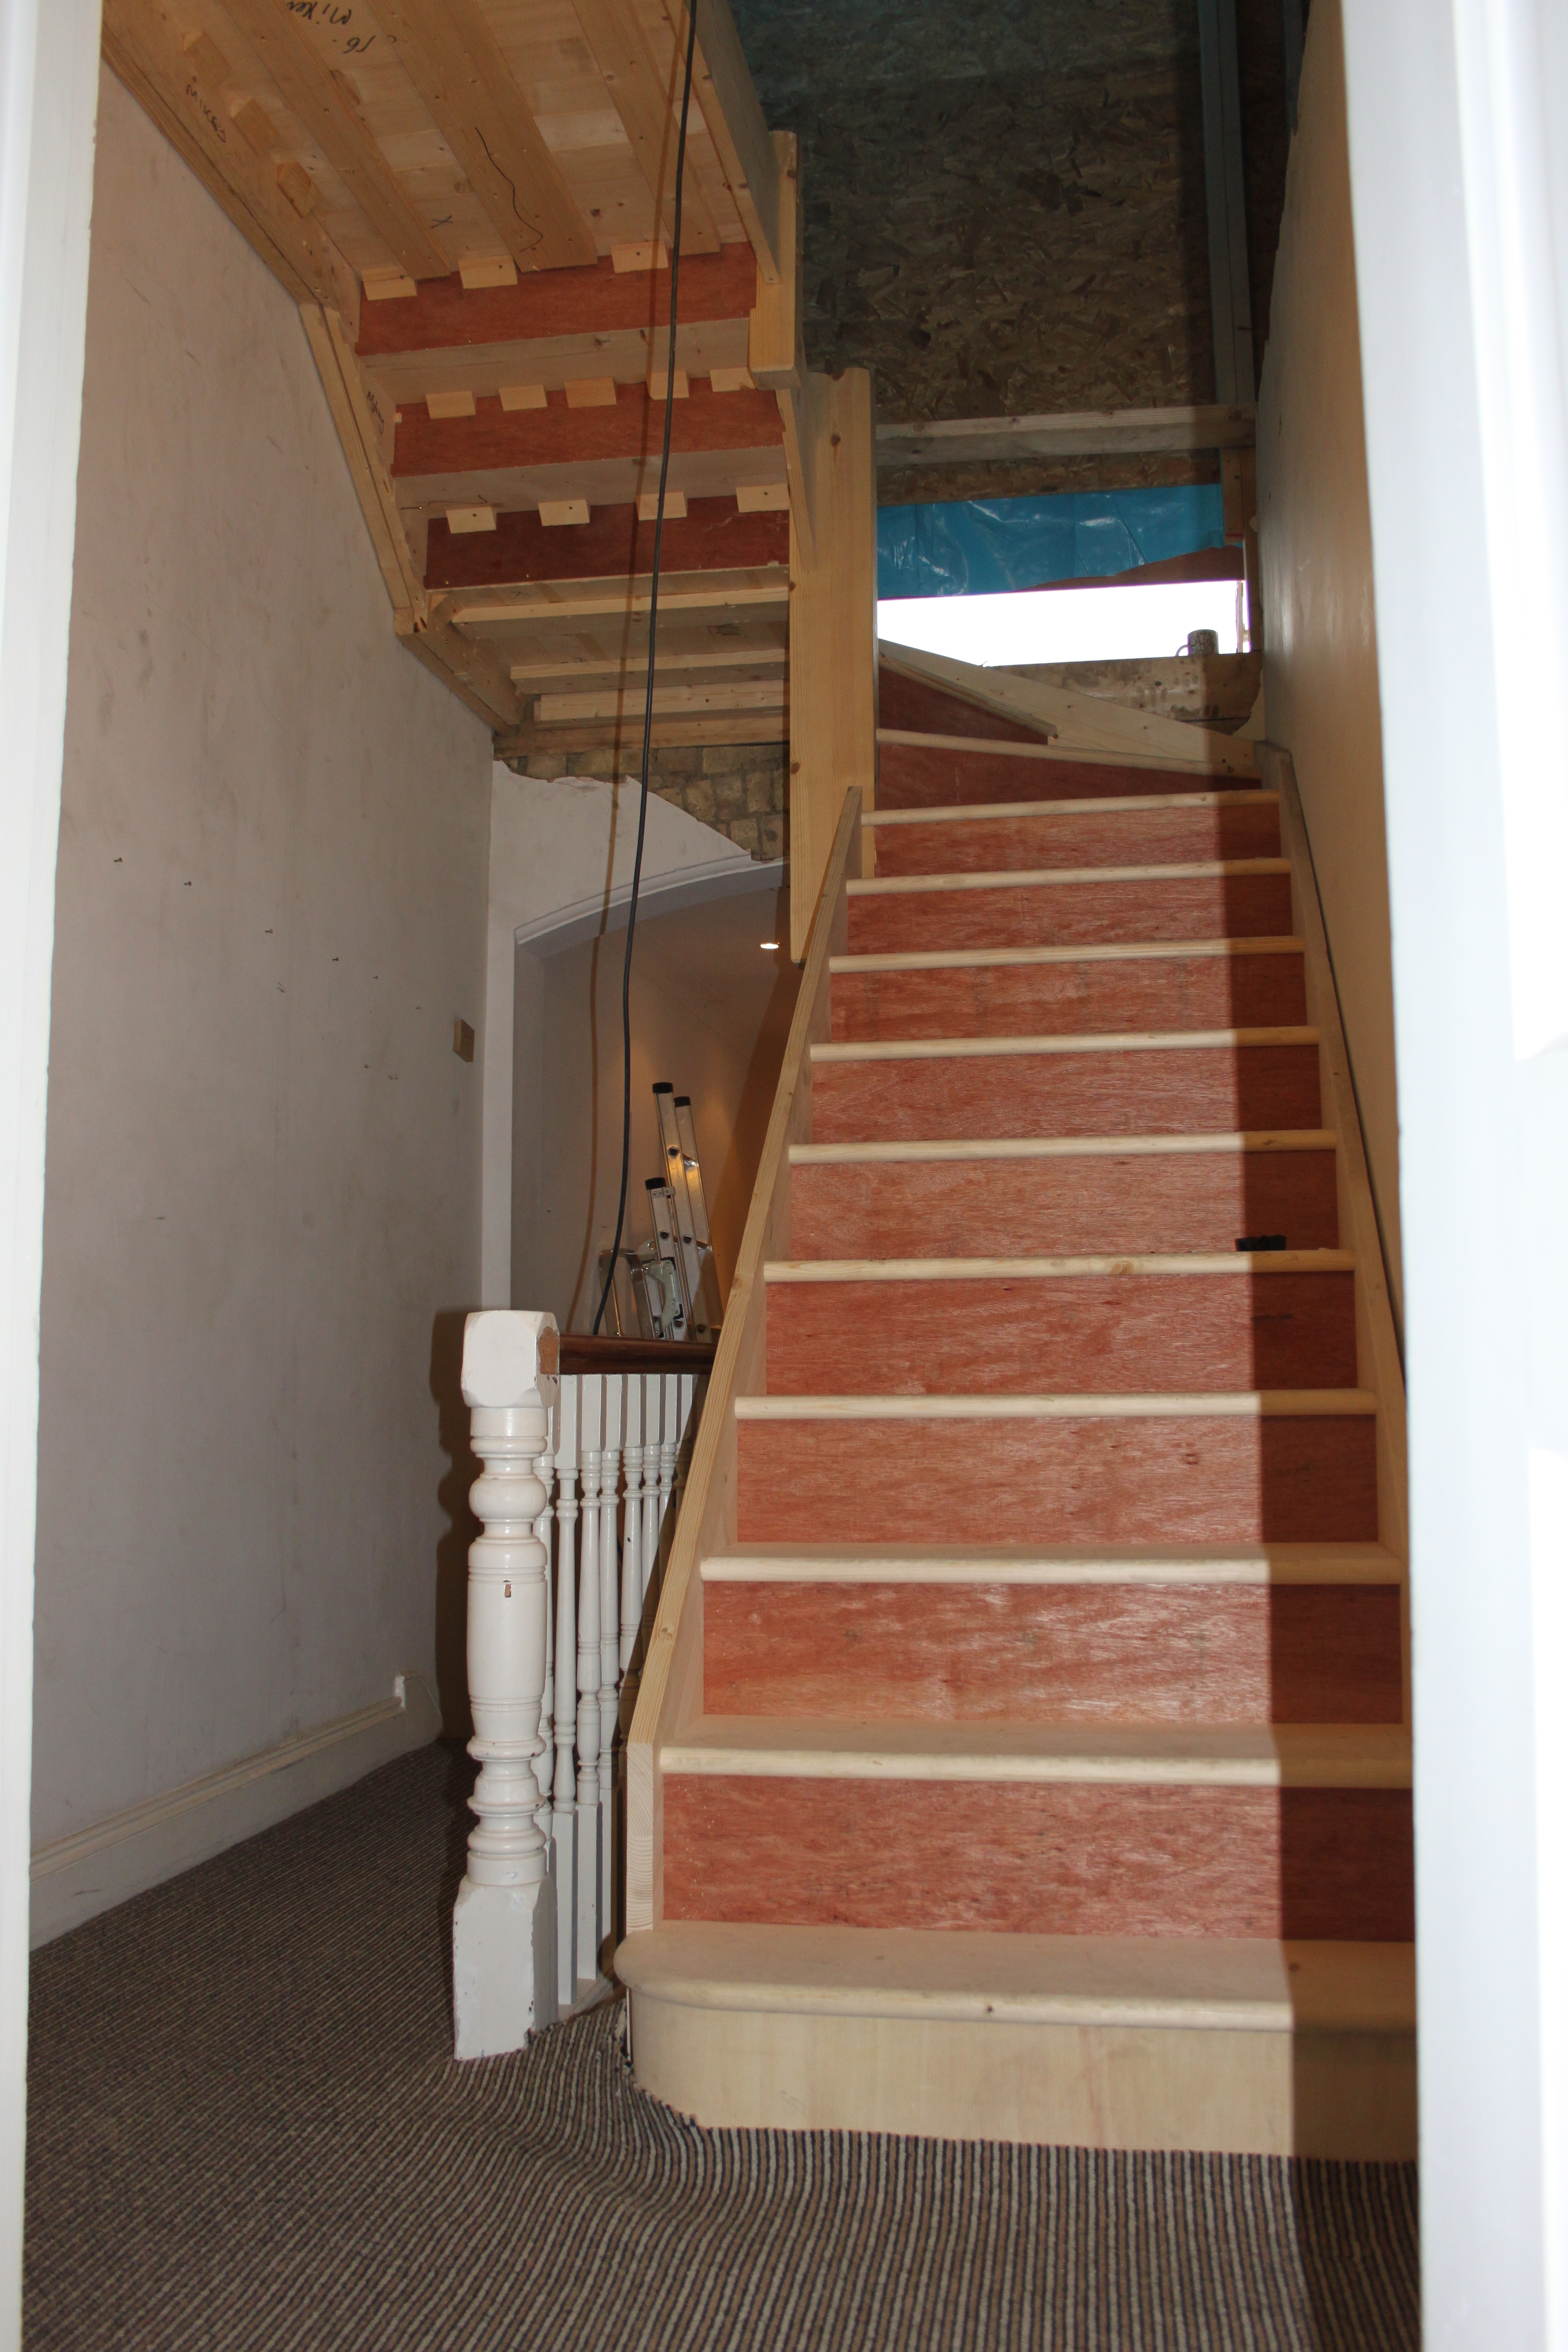 How To Fit Stairs In A Loft Conversion - BEST HOME DESIGN IDEAS